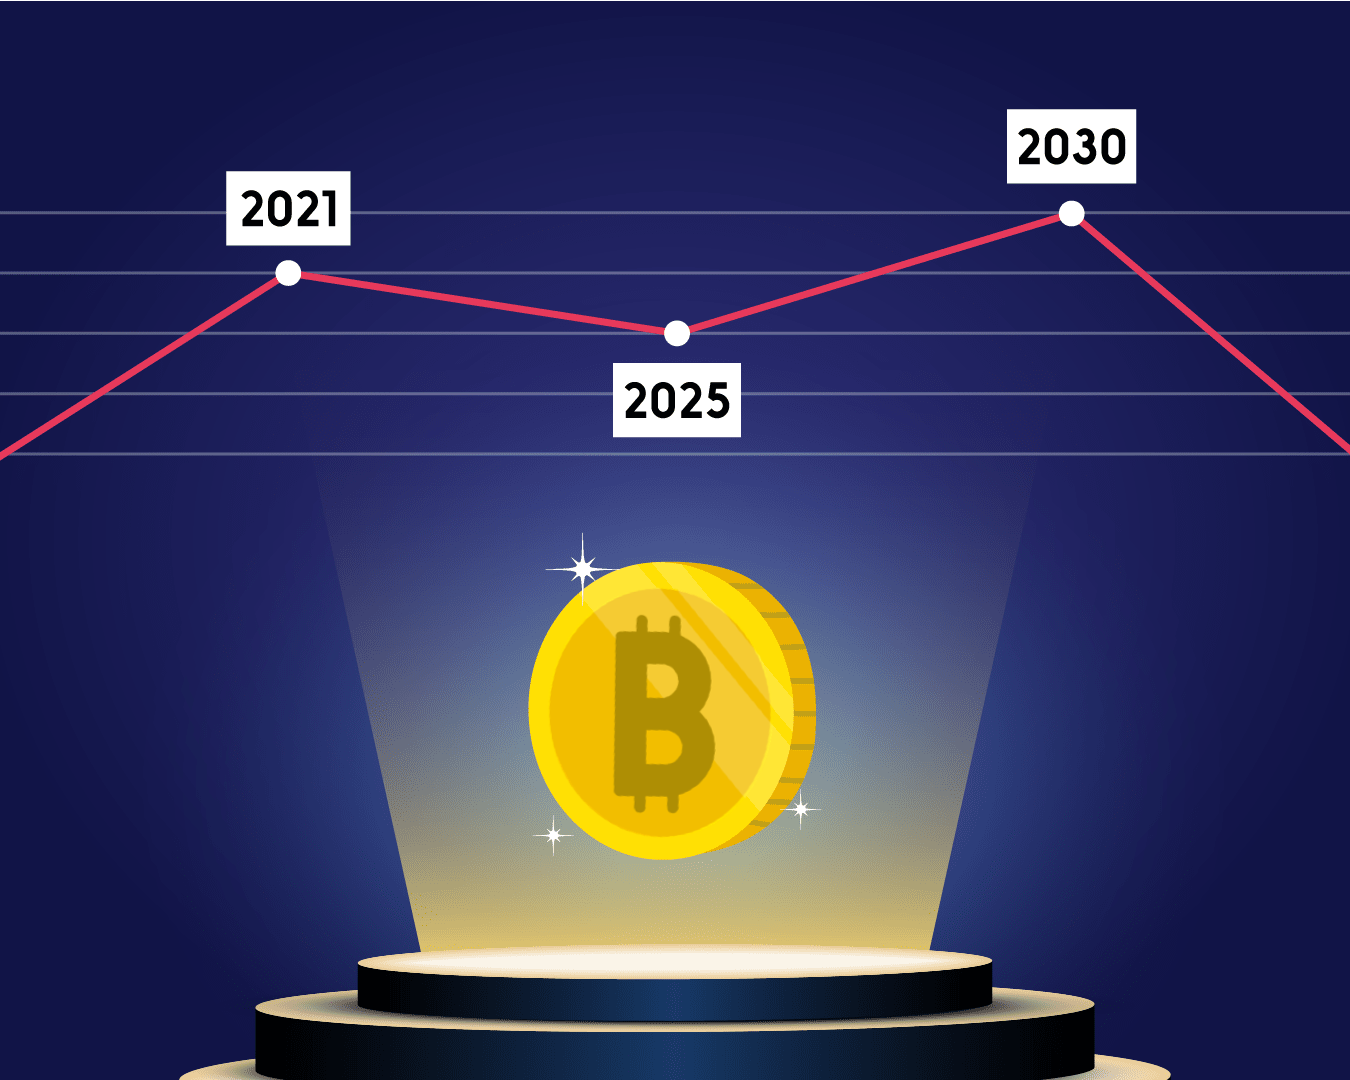 Bitcoin Cash (BCH) Price Predictions For 2021 And Beyond